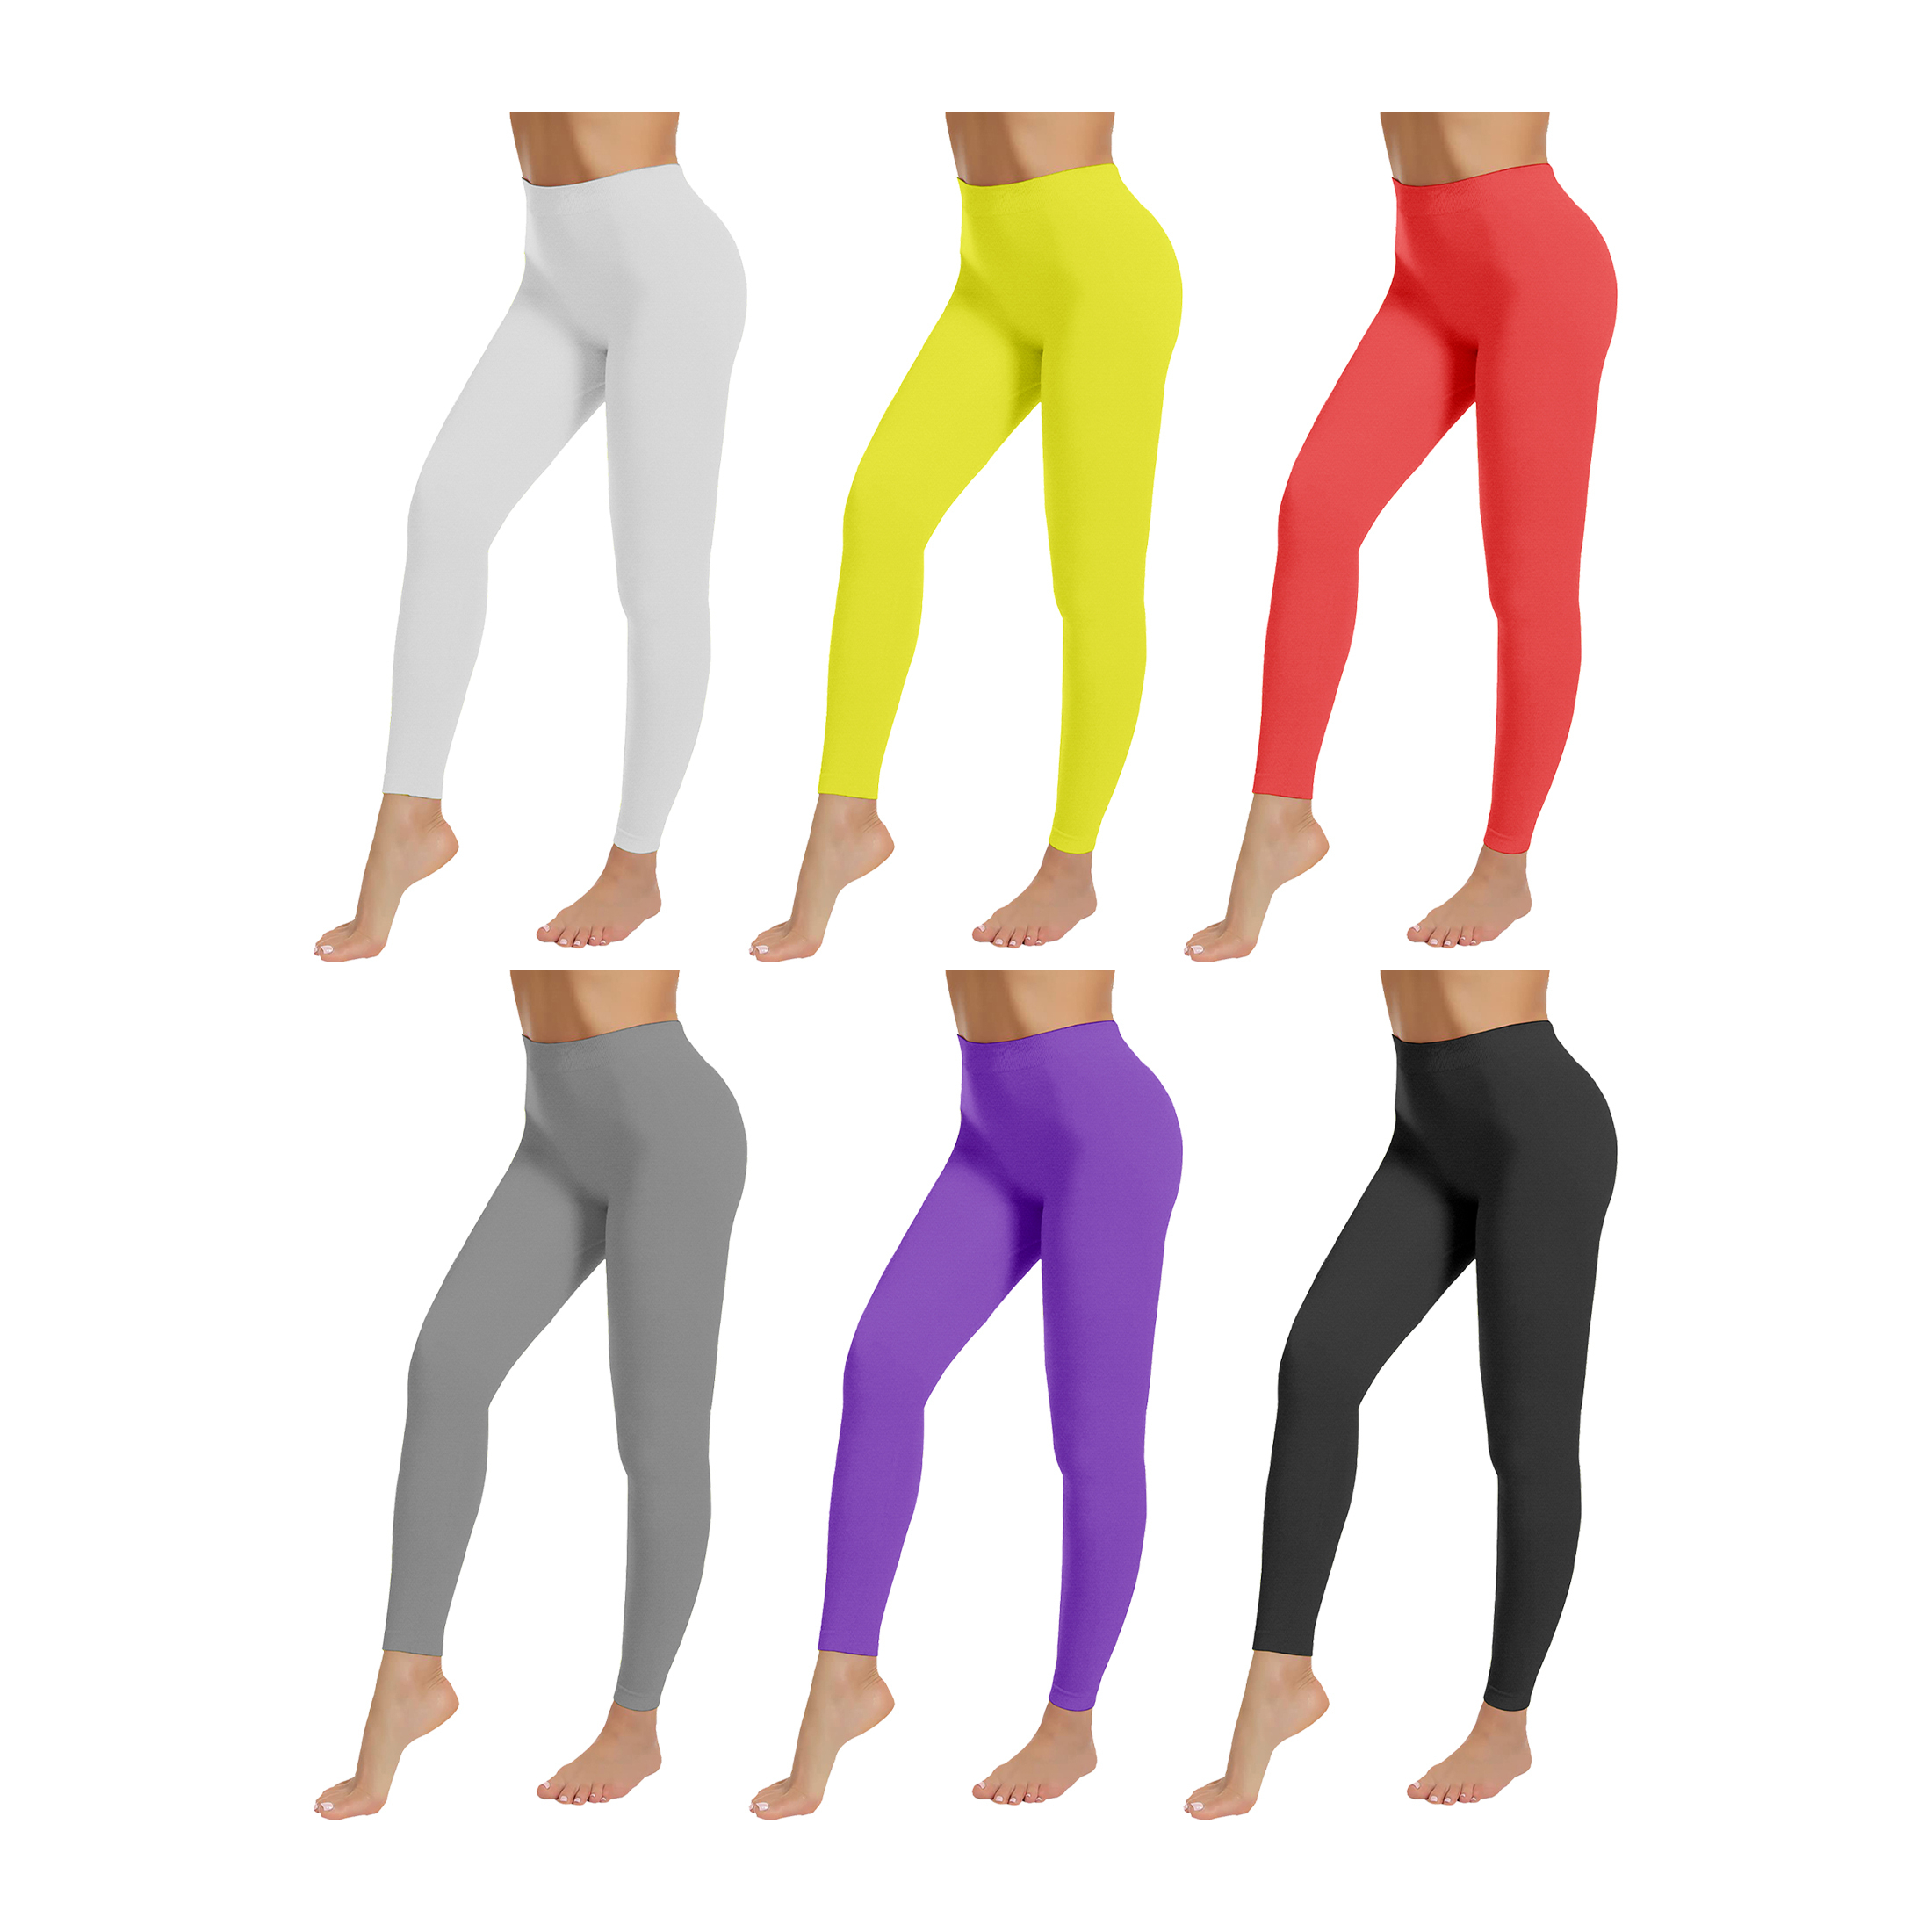 3-Pack: Women's High-Waist Ultra-Soft Solid Fitness Stretchy Yoga Leggings Pants - XL